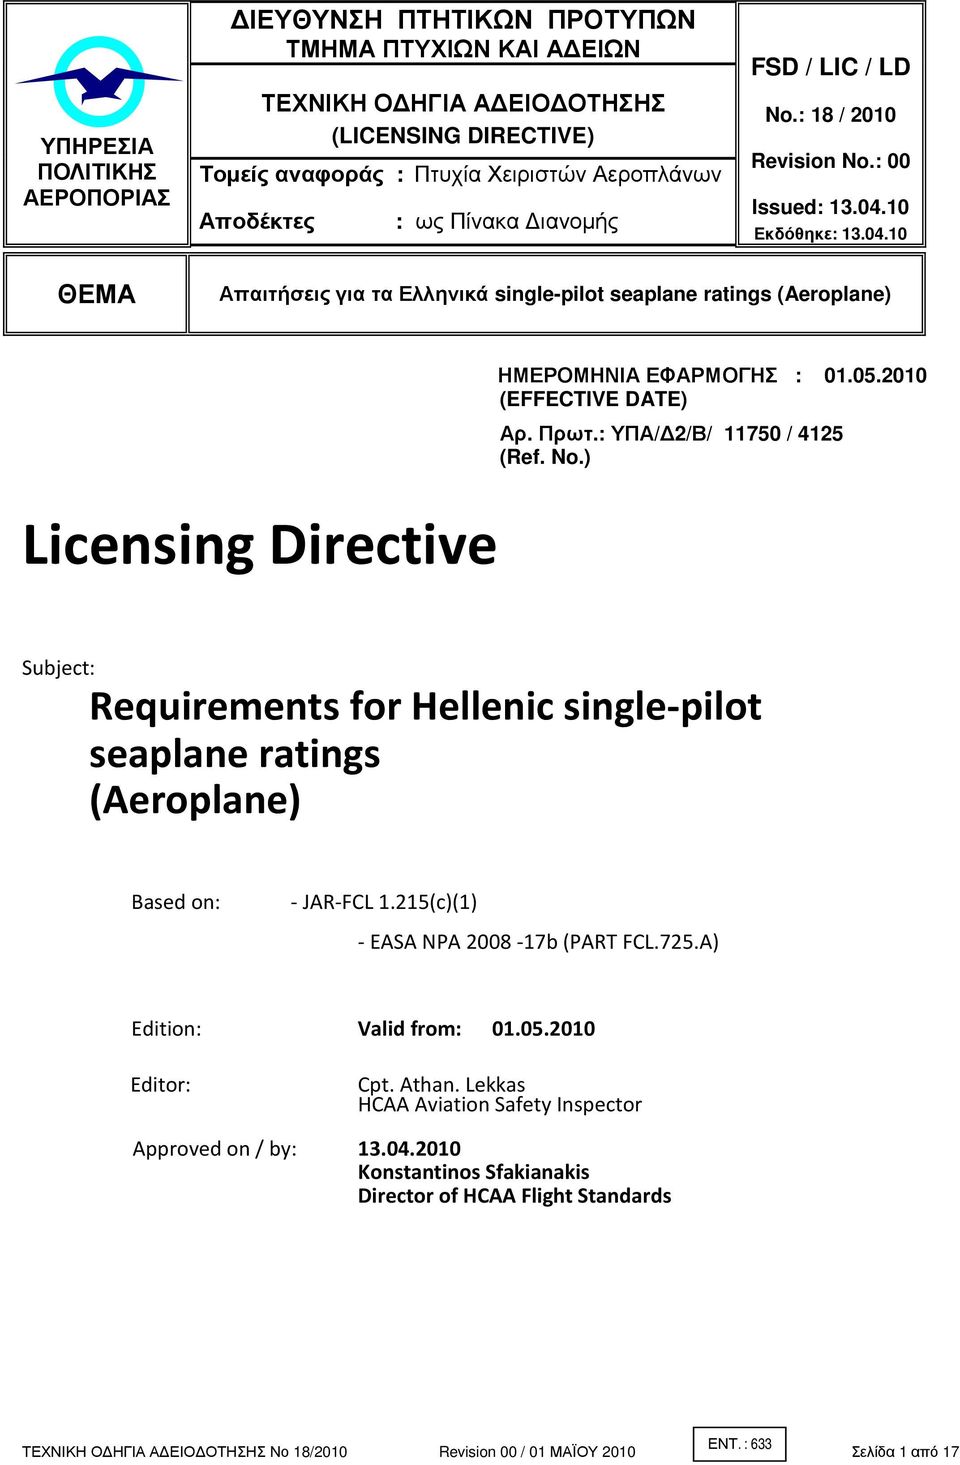 05.2010 (EFFECTIVE DATE) Αρ. Πρωτ.: ΥΠΑ/ 2/Β/ 11750 / 4125 (Ref. No.) Subject: Requirements for Hellenic single-pilot seaplane ratings (Aeroplane) Based on: - JAR-FCL 1.